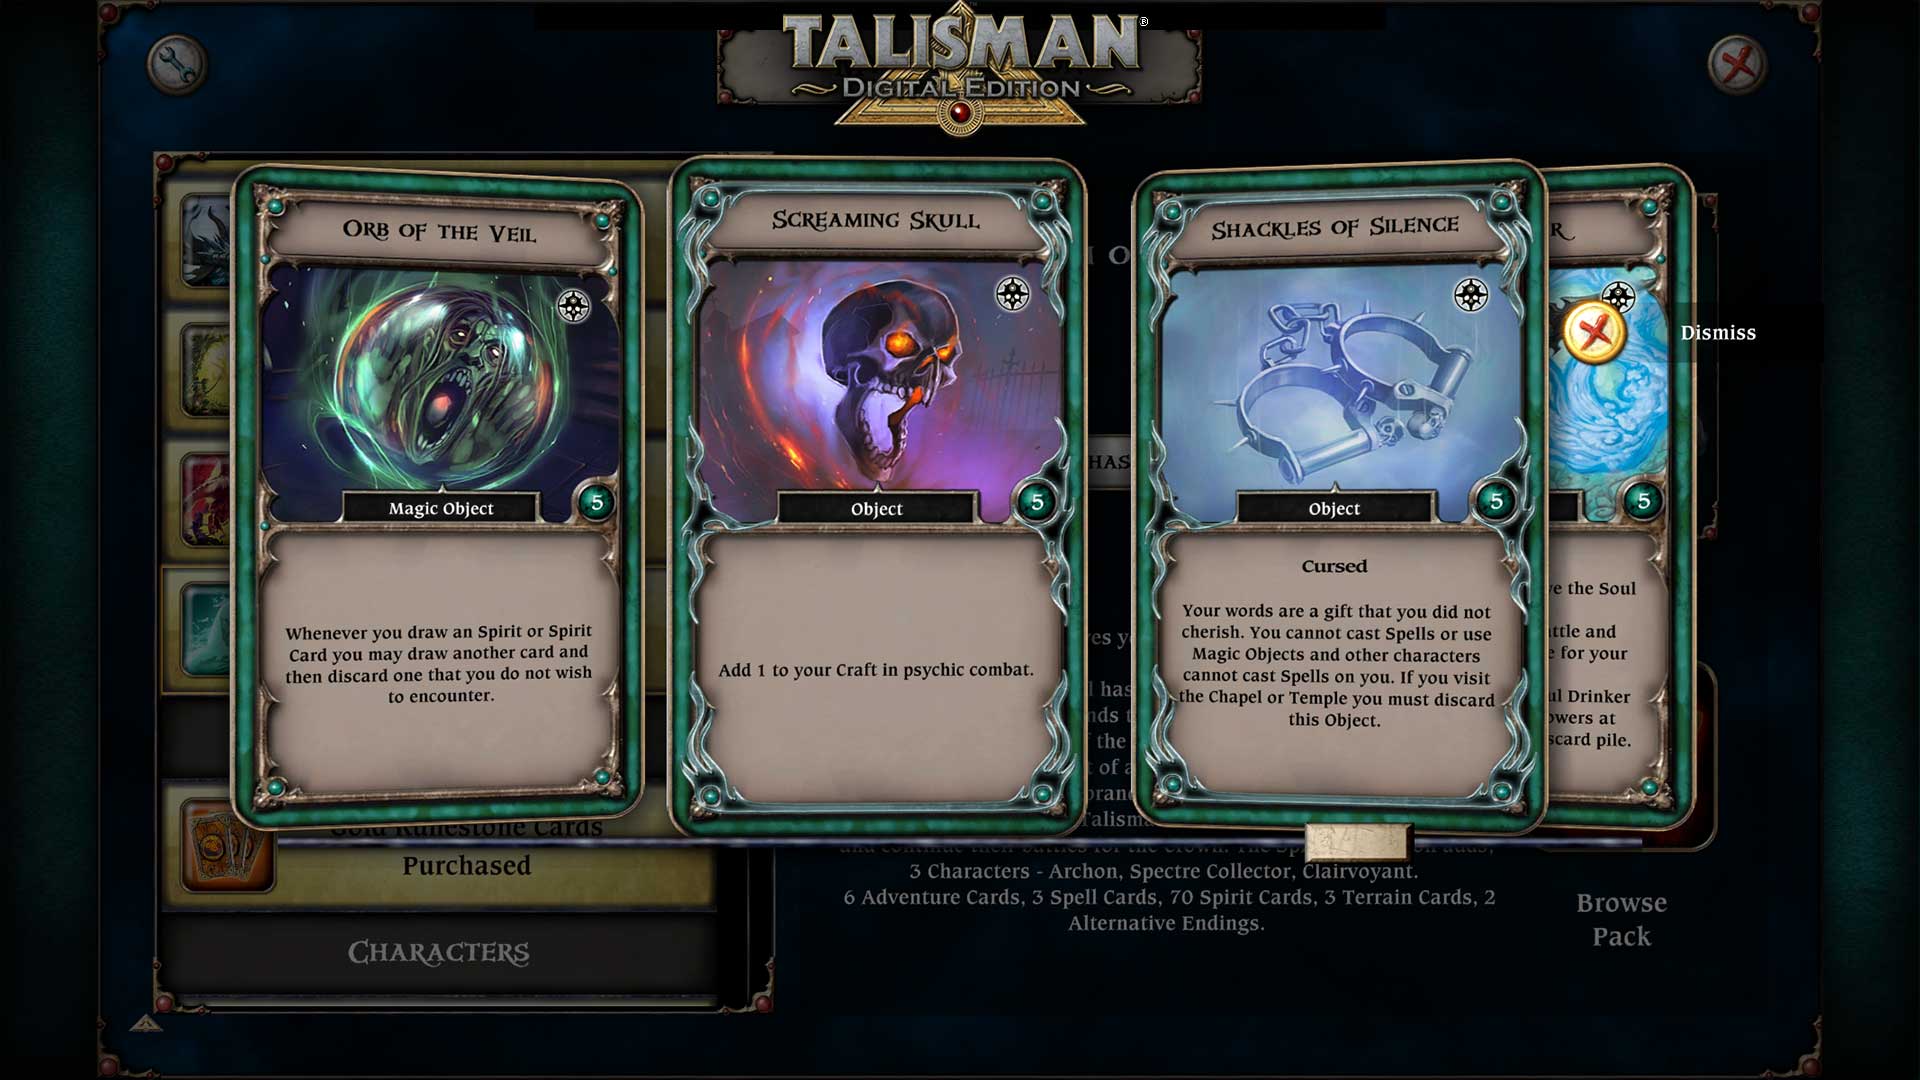 Talisman - The Realm of Souls Expansion DLC Steam CD Key 2.16$